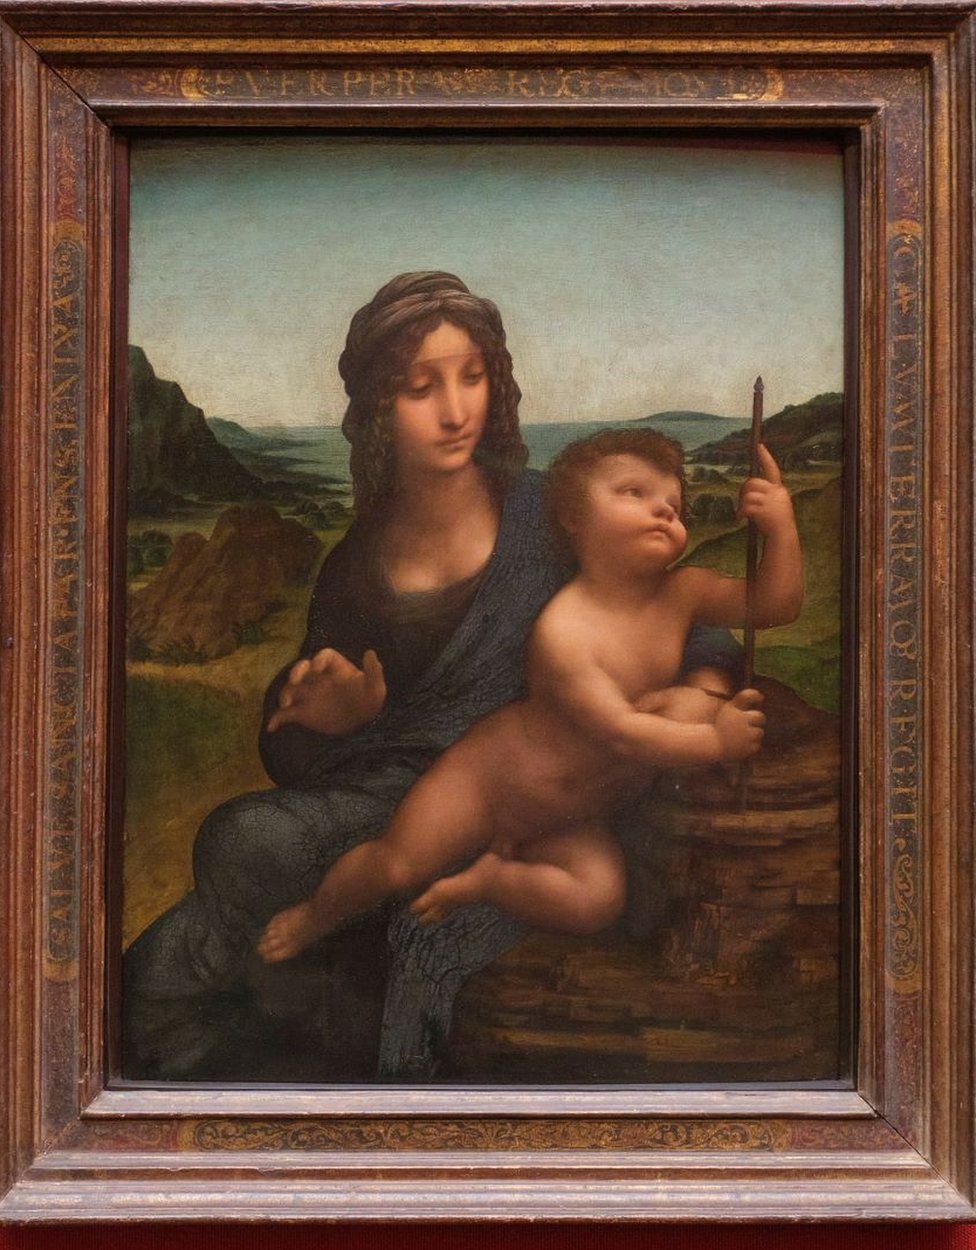 The Madonna of the Yarnwinder is now on display in the National Gallery of Scotland